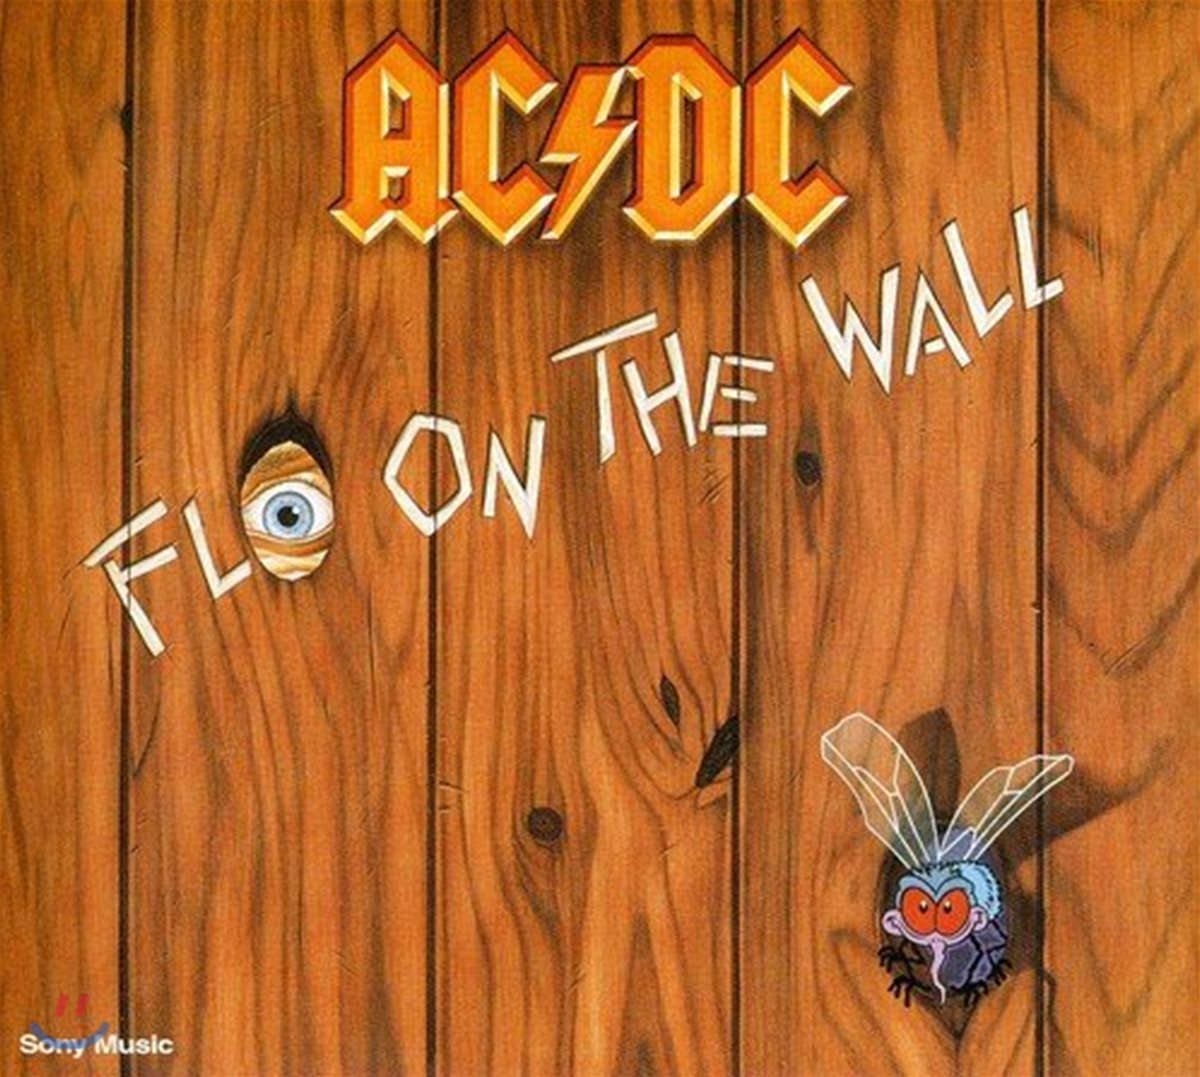 AC/DC (에이씨디씨) - Fly On The Wall